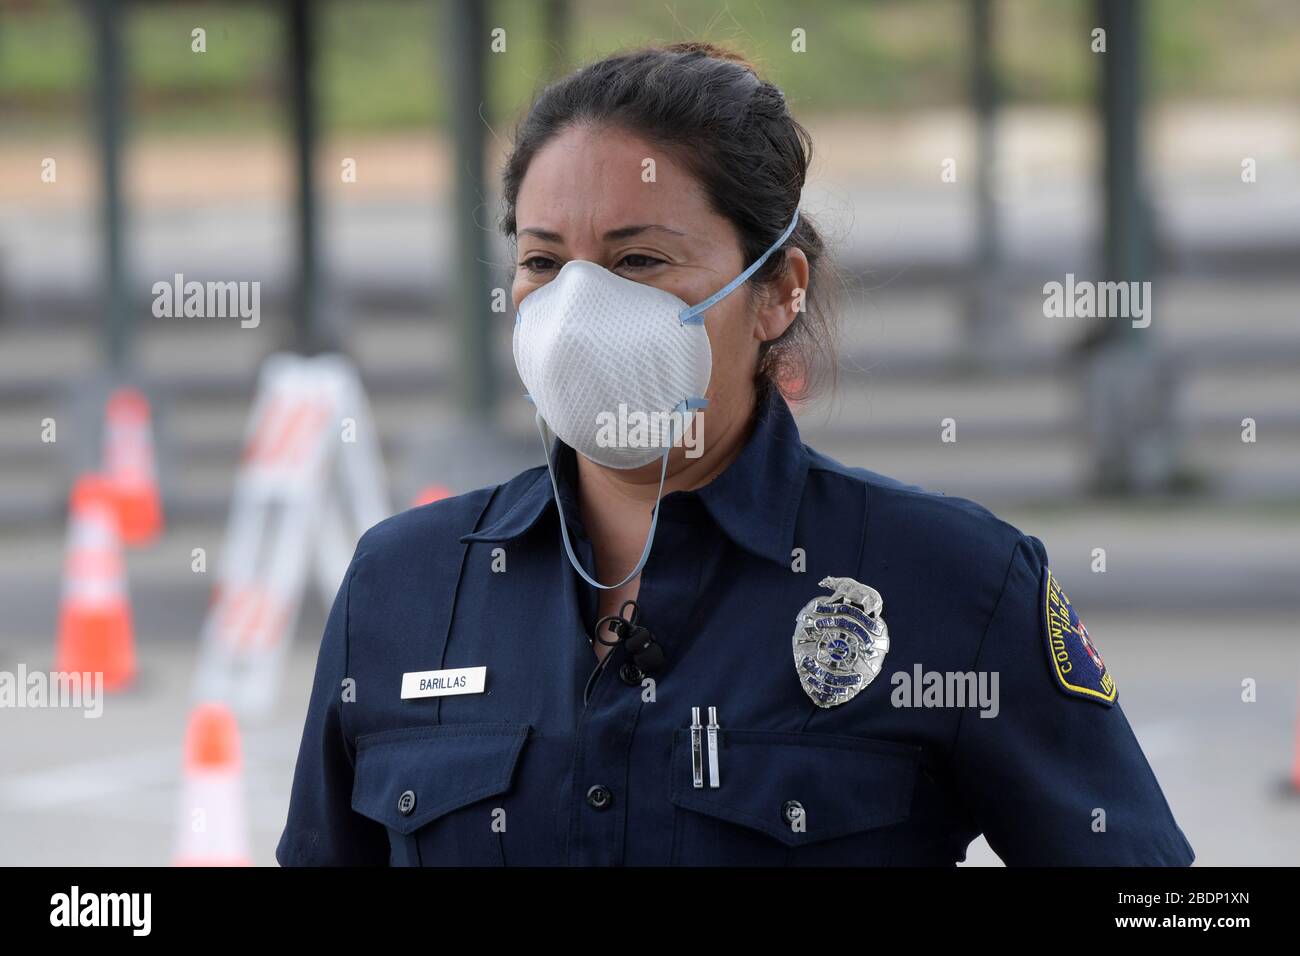 CALIFORNIA, USA. 08th Apr, 2020. LA County Fire Department Lifeguard public information officer Lydia Barillas wears a face mask at coronavirus drive-thru testing site at East Los Angeles College amid the global coronavirus COVID-19 pandemic, Wednesday, April 8, 2020, in Monterey Park, Califronia, USA. (Photo by IOS/Espa-Images) Credit: European Sports Photo Agency/Alamy Live News Stock Photo